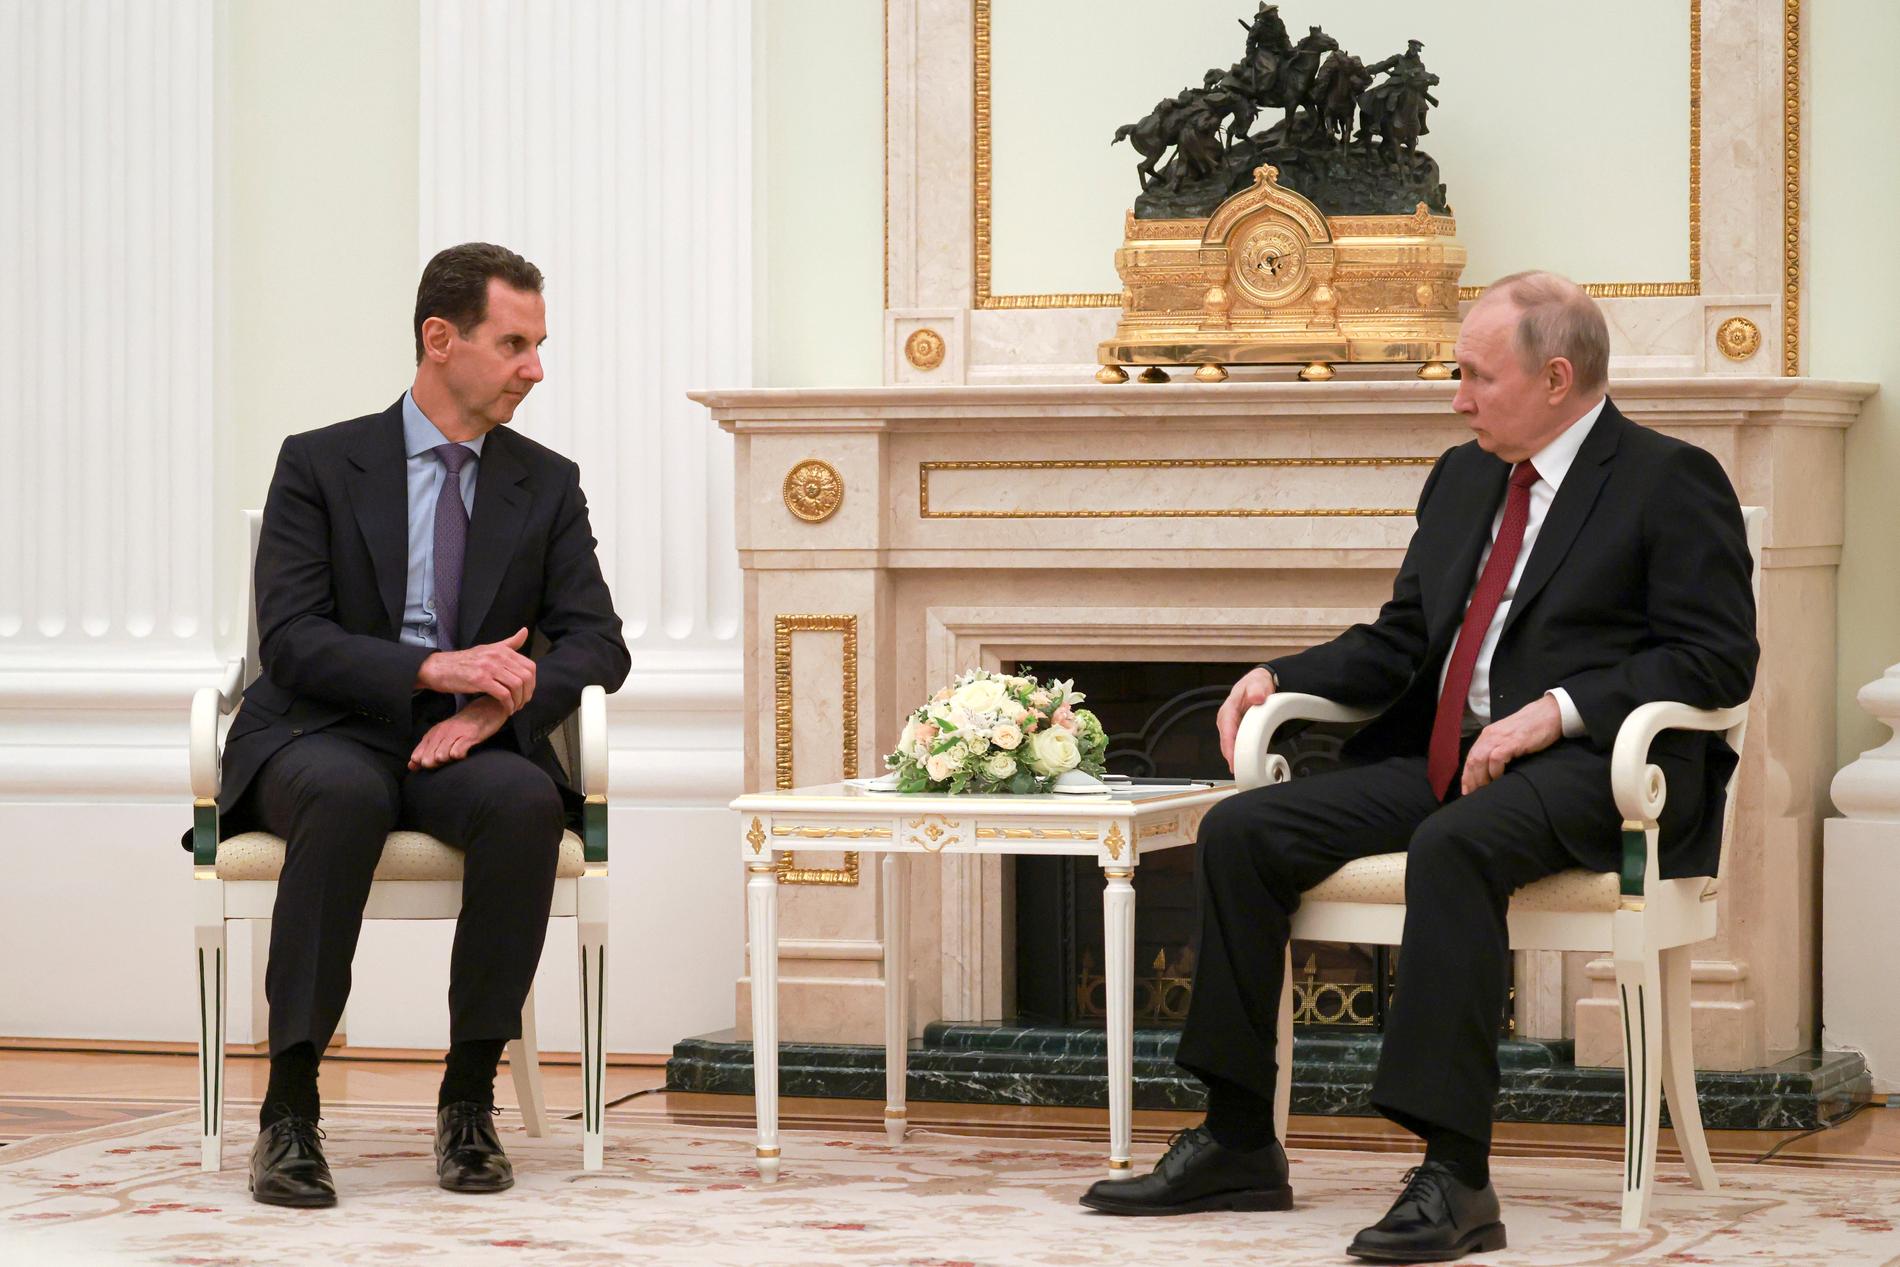 Partners in war: Vladimir Putin with Syrian dictator Bashar al-Assad in the Kremlin on March 15 this year.  Putin came to help Assad in the war in Syria.